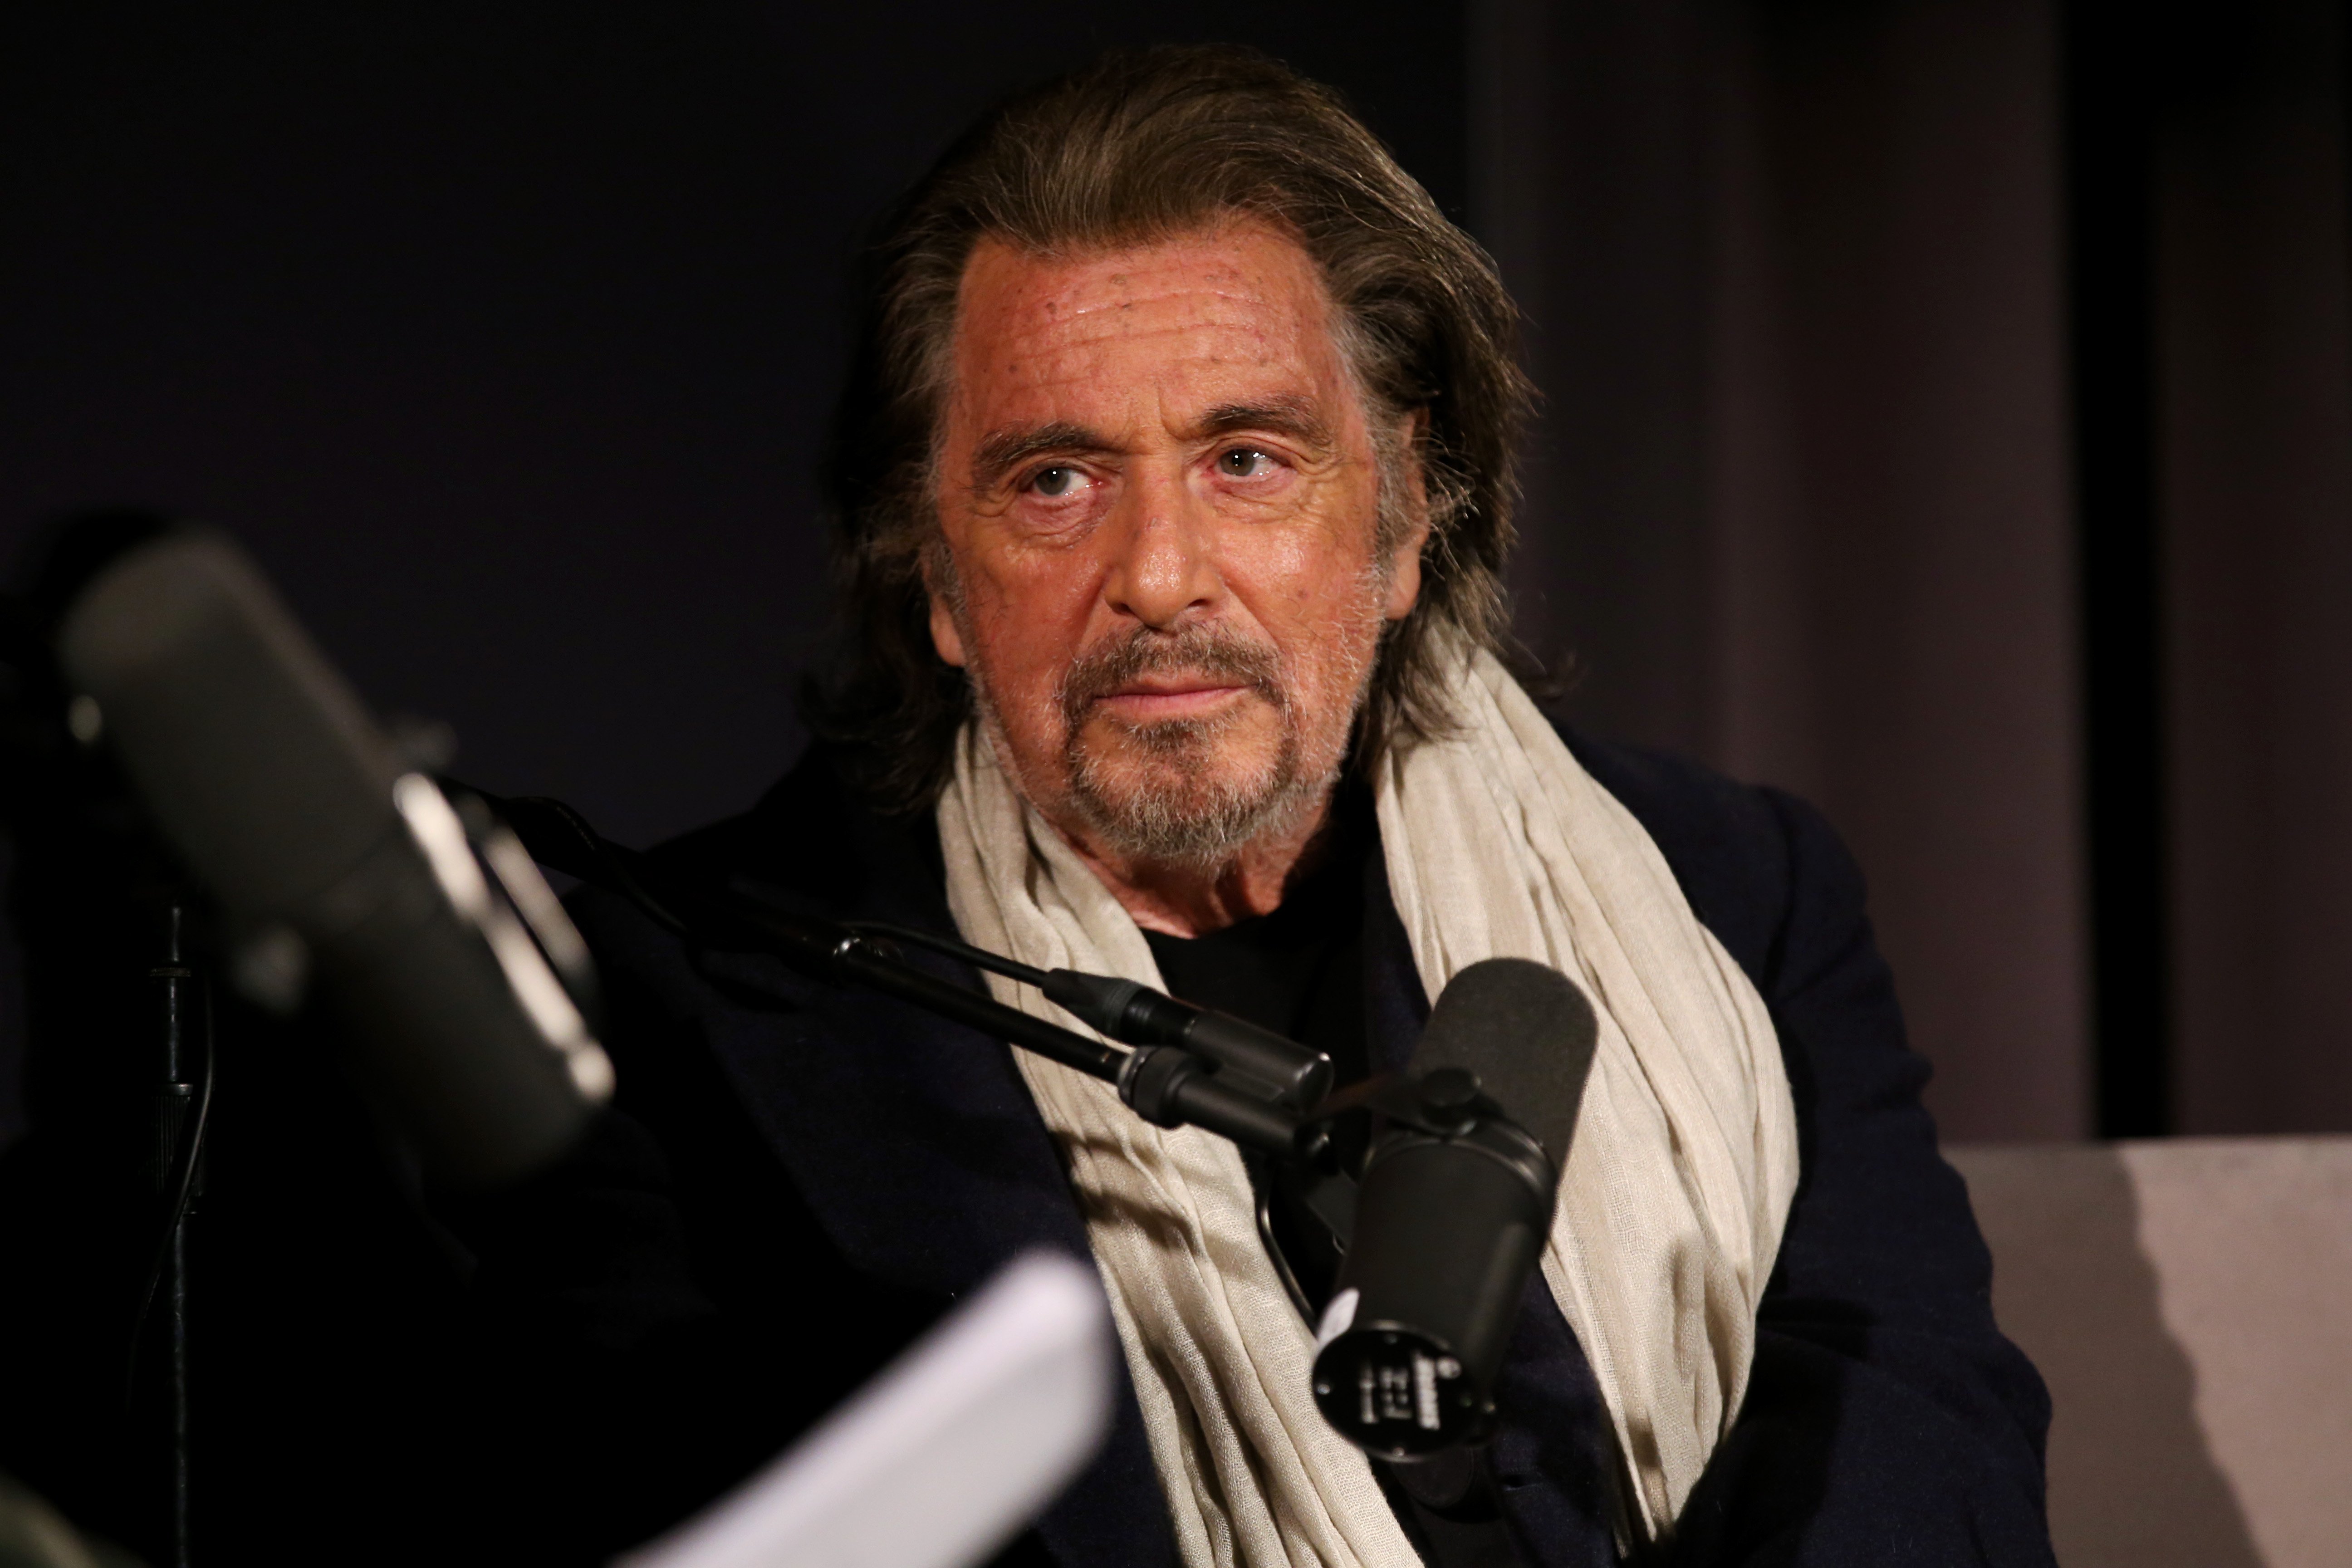 Al Pacino speaks onstage during The Hollywood Reporter Awards Chatter Live with Al Pacino at DGA Theater on December 05, 2019, in Los Angeles, California | Photo: Getty Images.